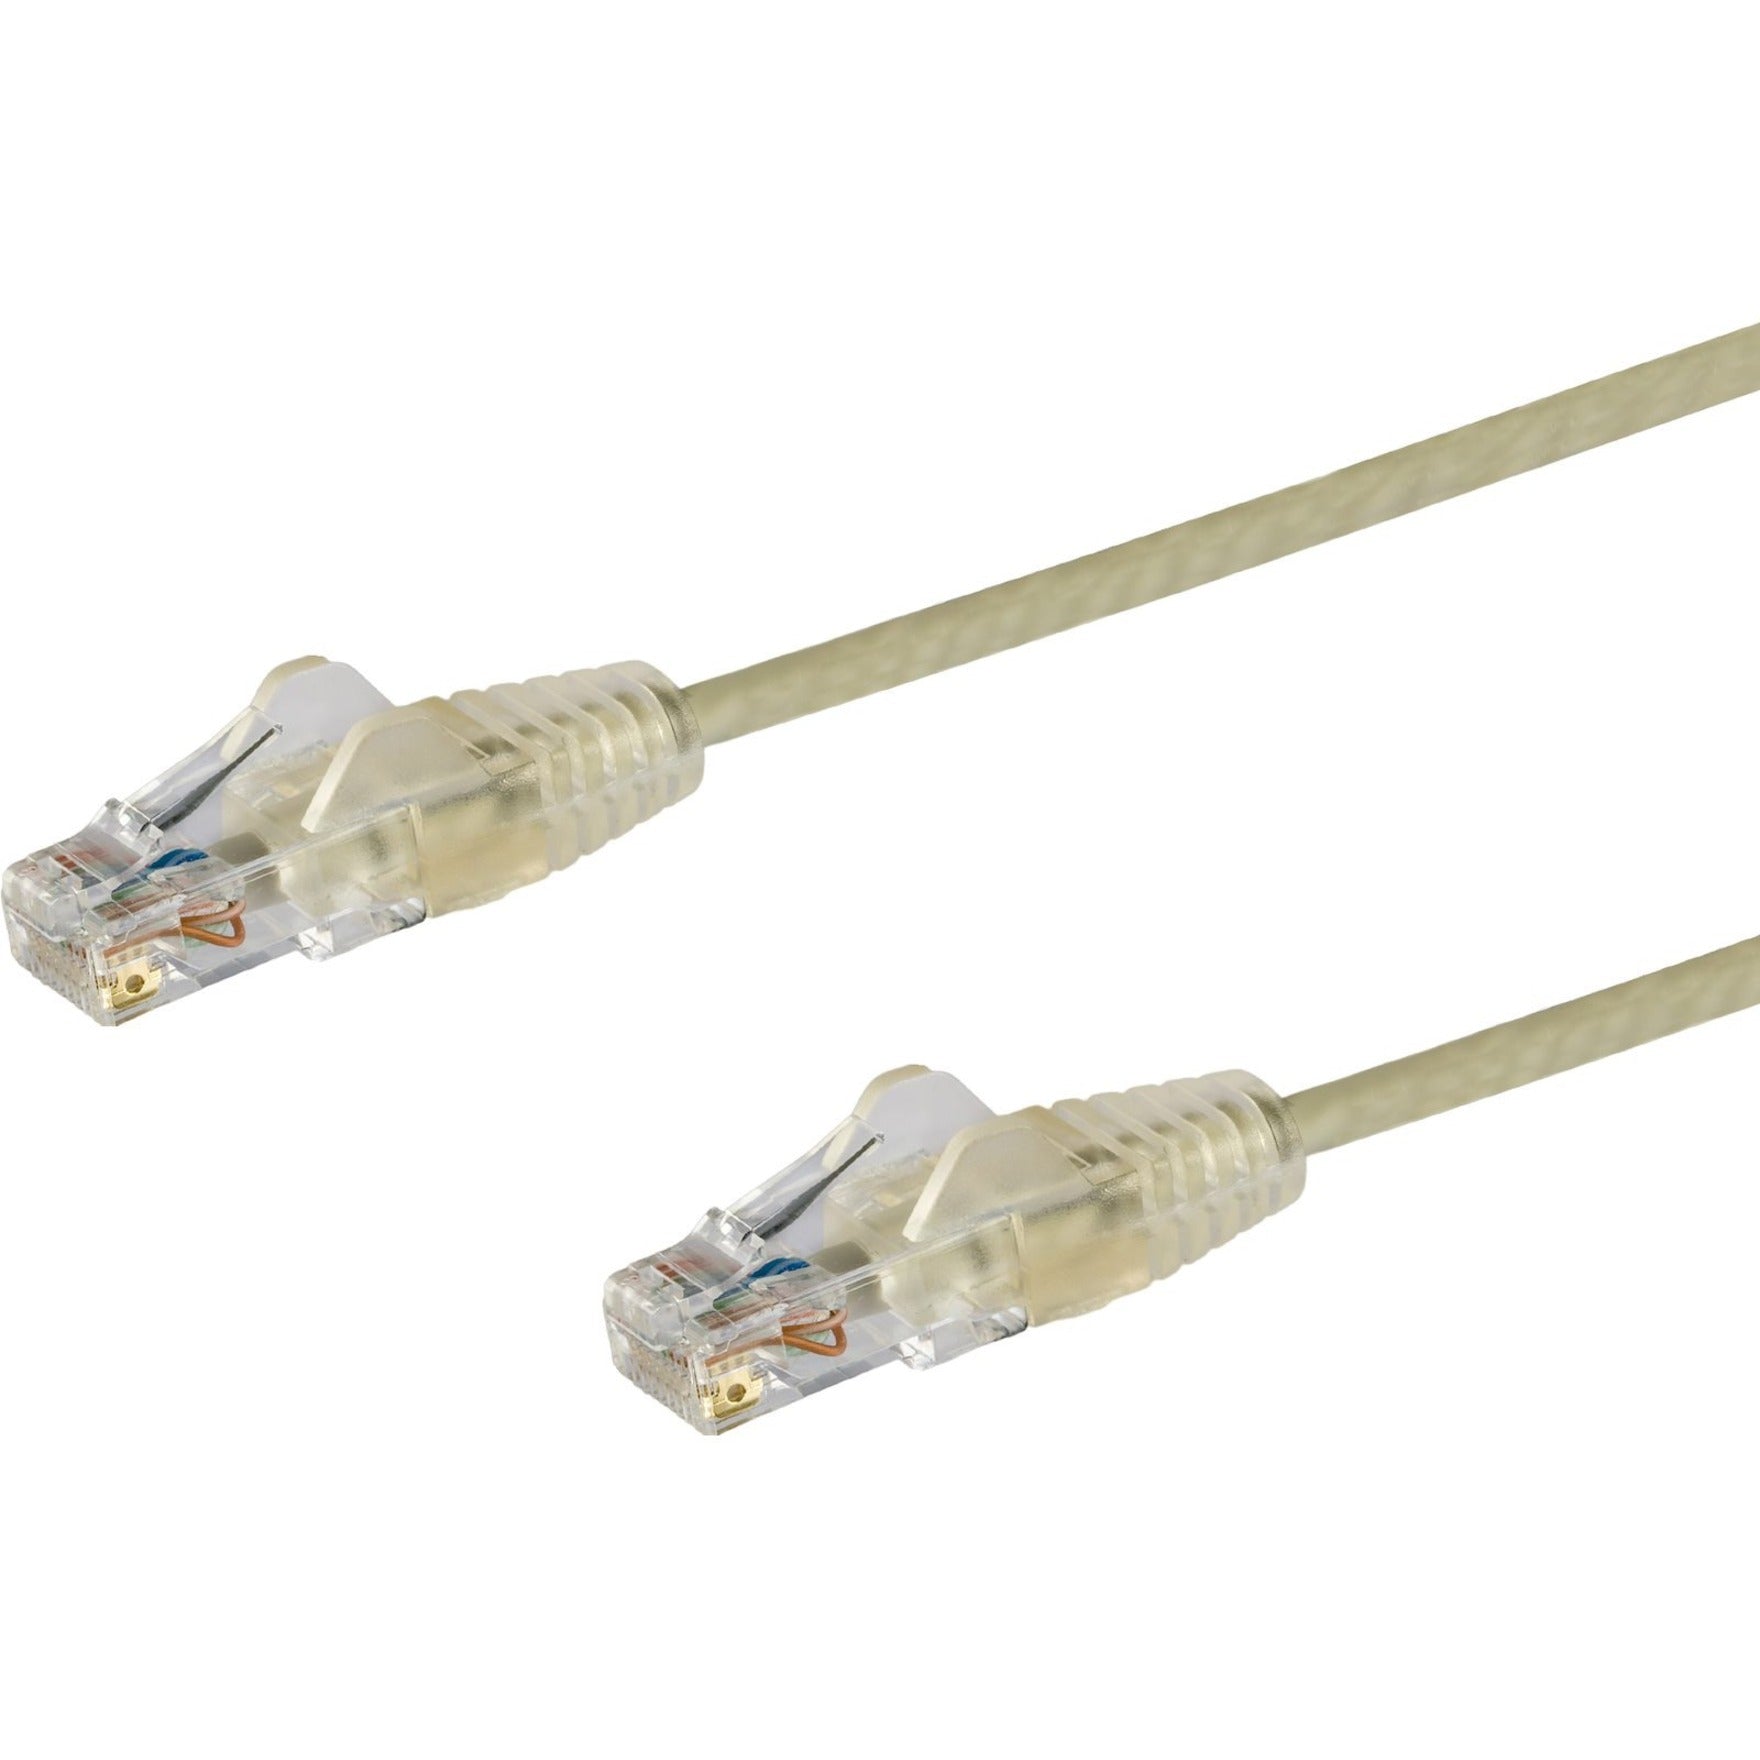 StarTech.com N6PAT10GRS Cat6 Patch Network Cable, 10 ft Gray, Slim, Snagless RJ45 Connectors, Cat6 Cable, Cat6 Patch Cable, Cat6 Network Cable